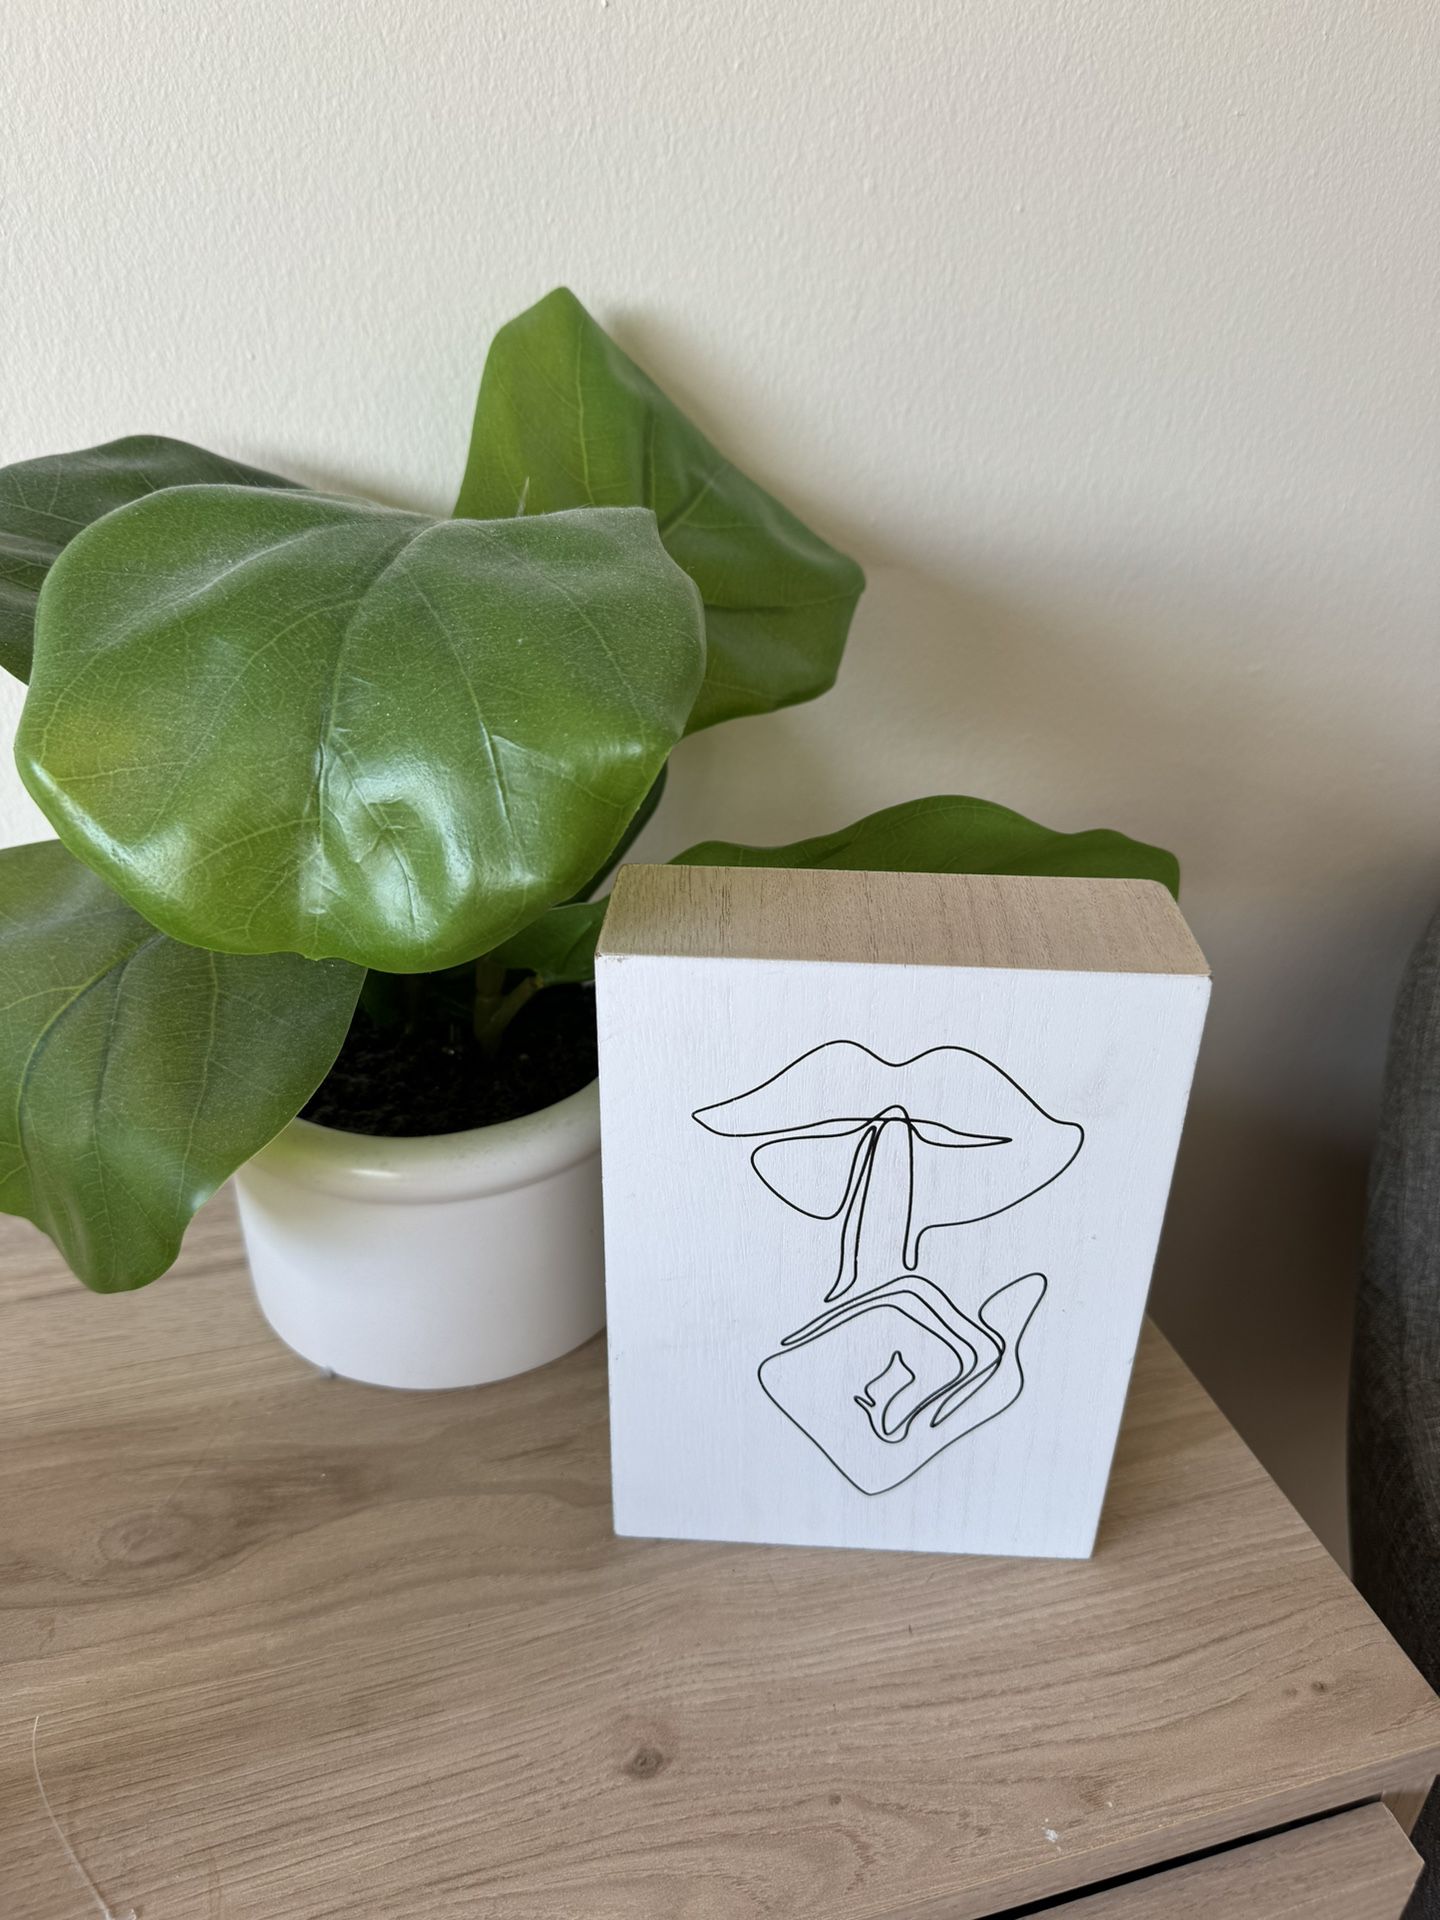 Sign And Small Flower Pot With (fake) Plant 